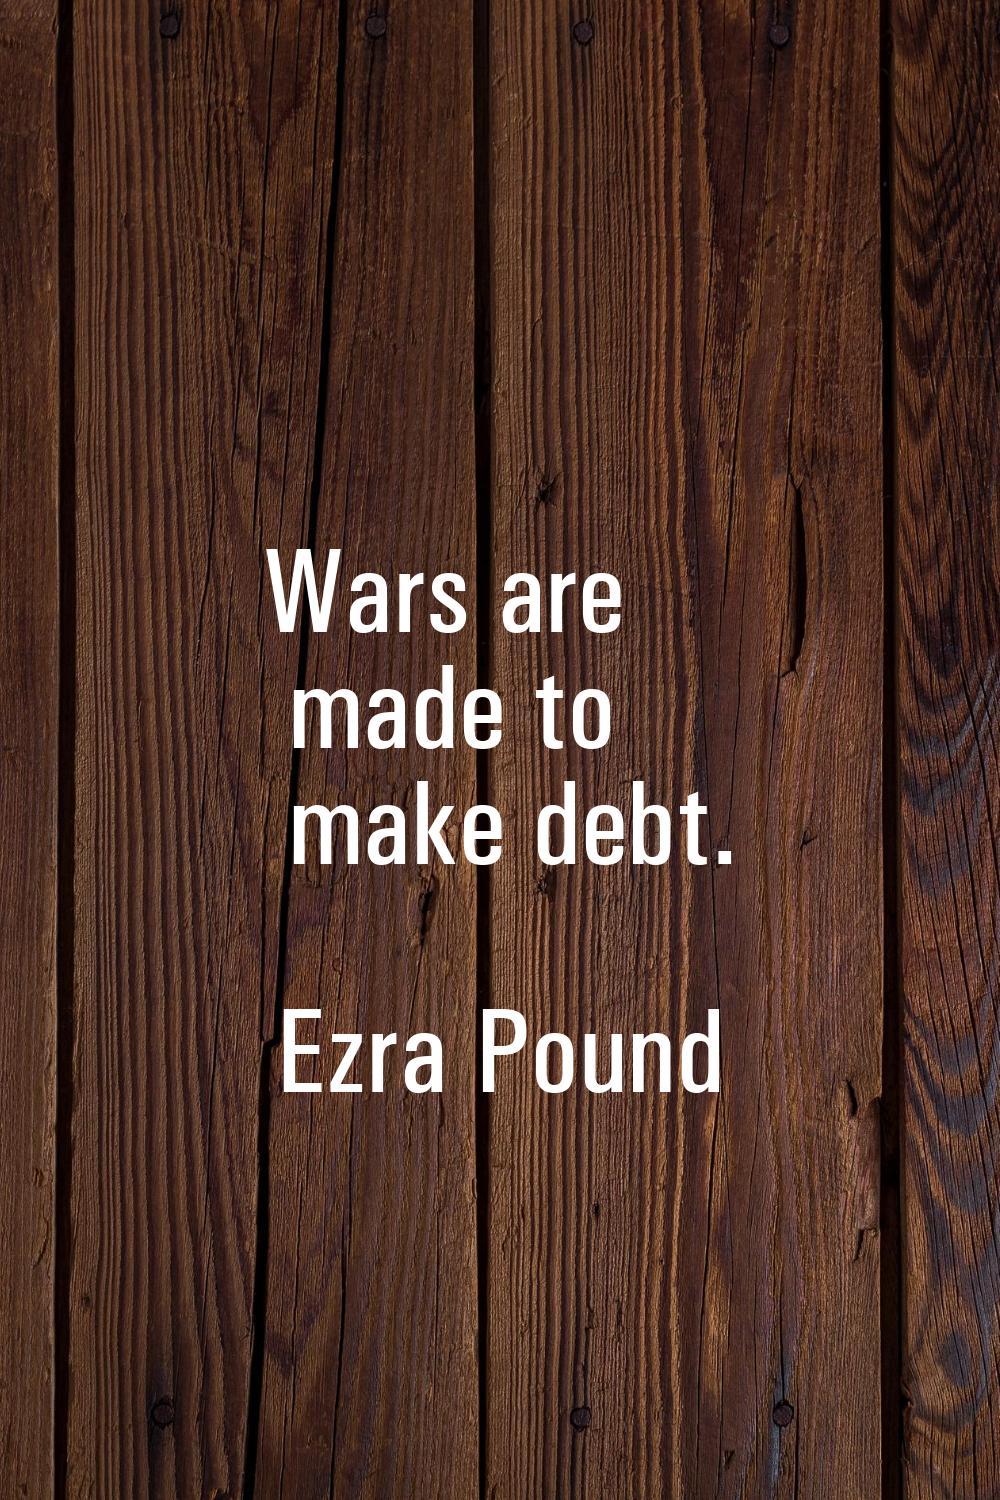 Wars are made to make debt.